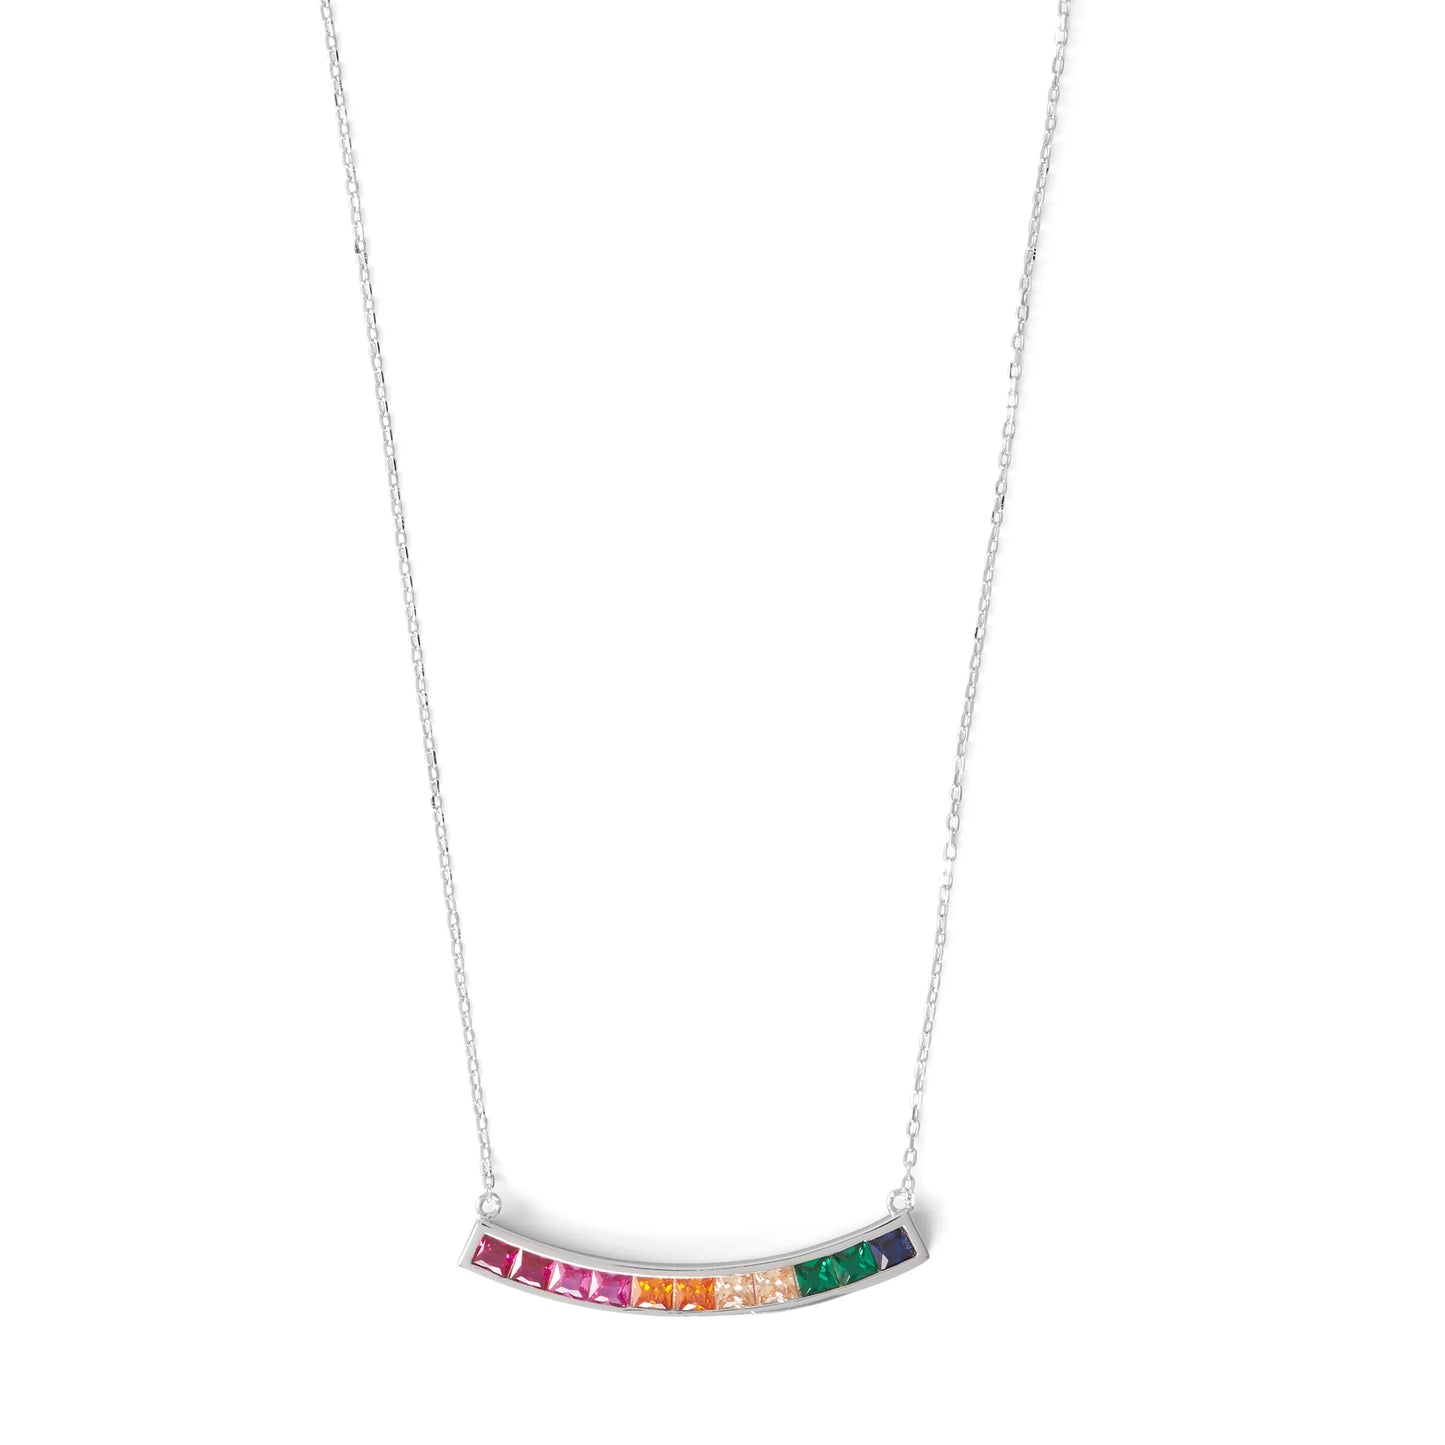 16" with a 2" extension.Rhodium Plated Rainbow CZ Necklace